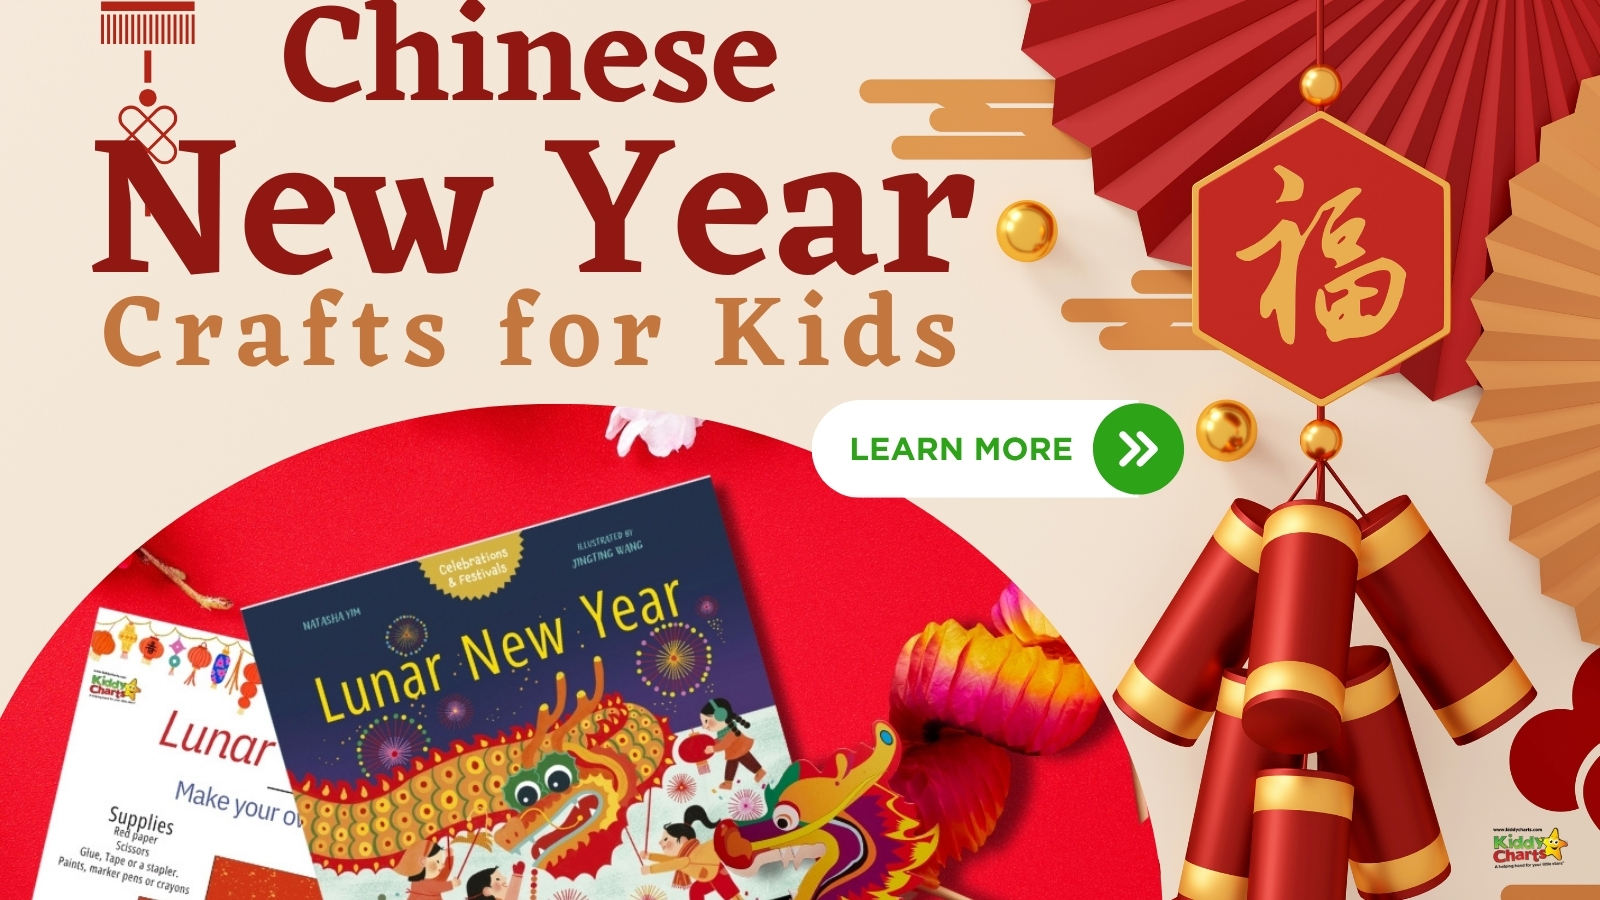 Chinese New Year crafts for kids with Lunar New Year book